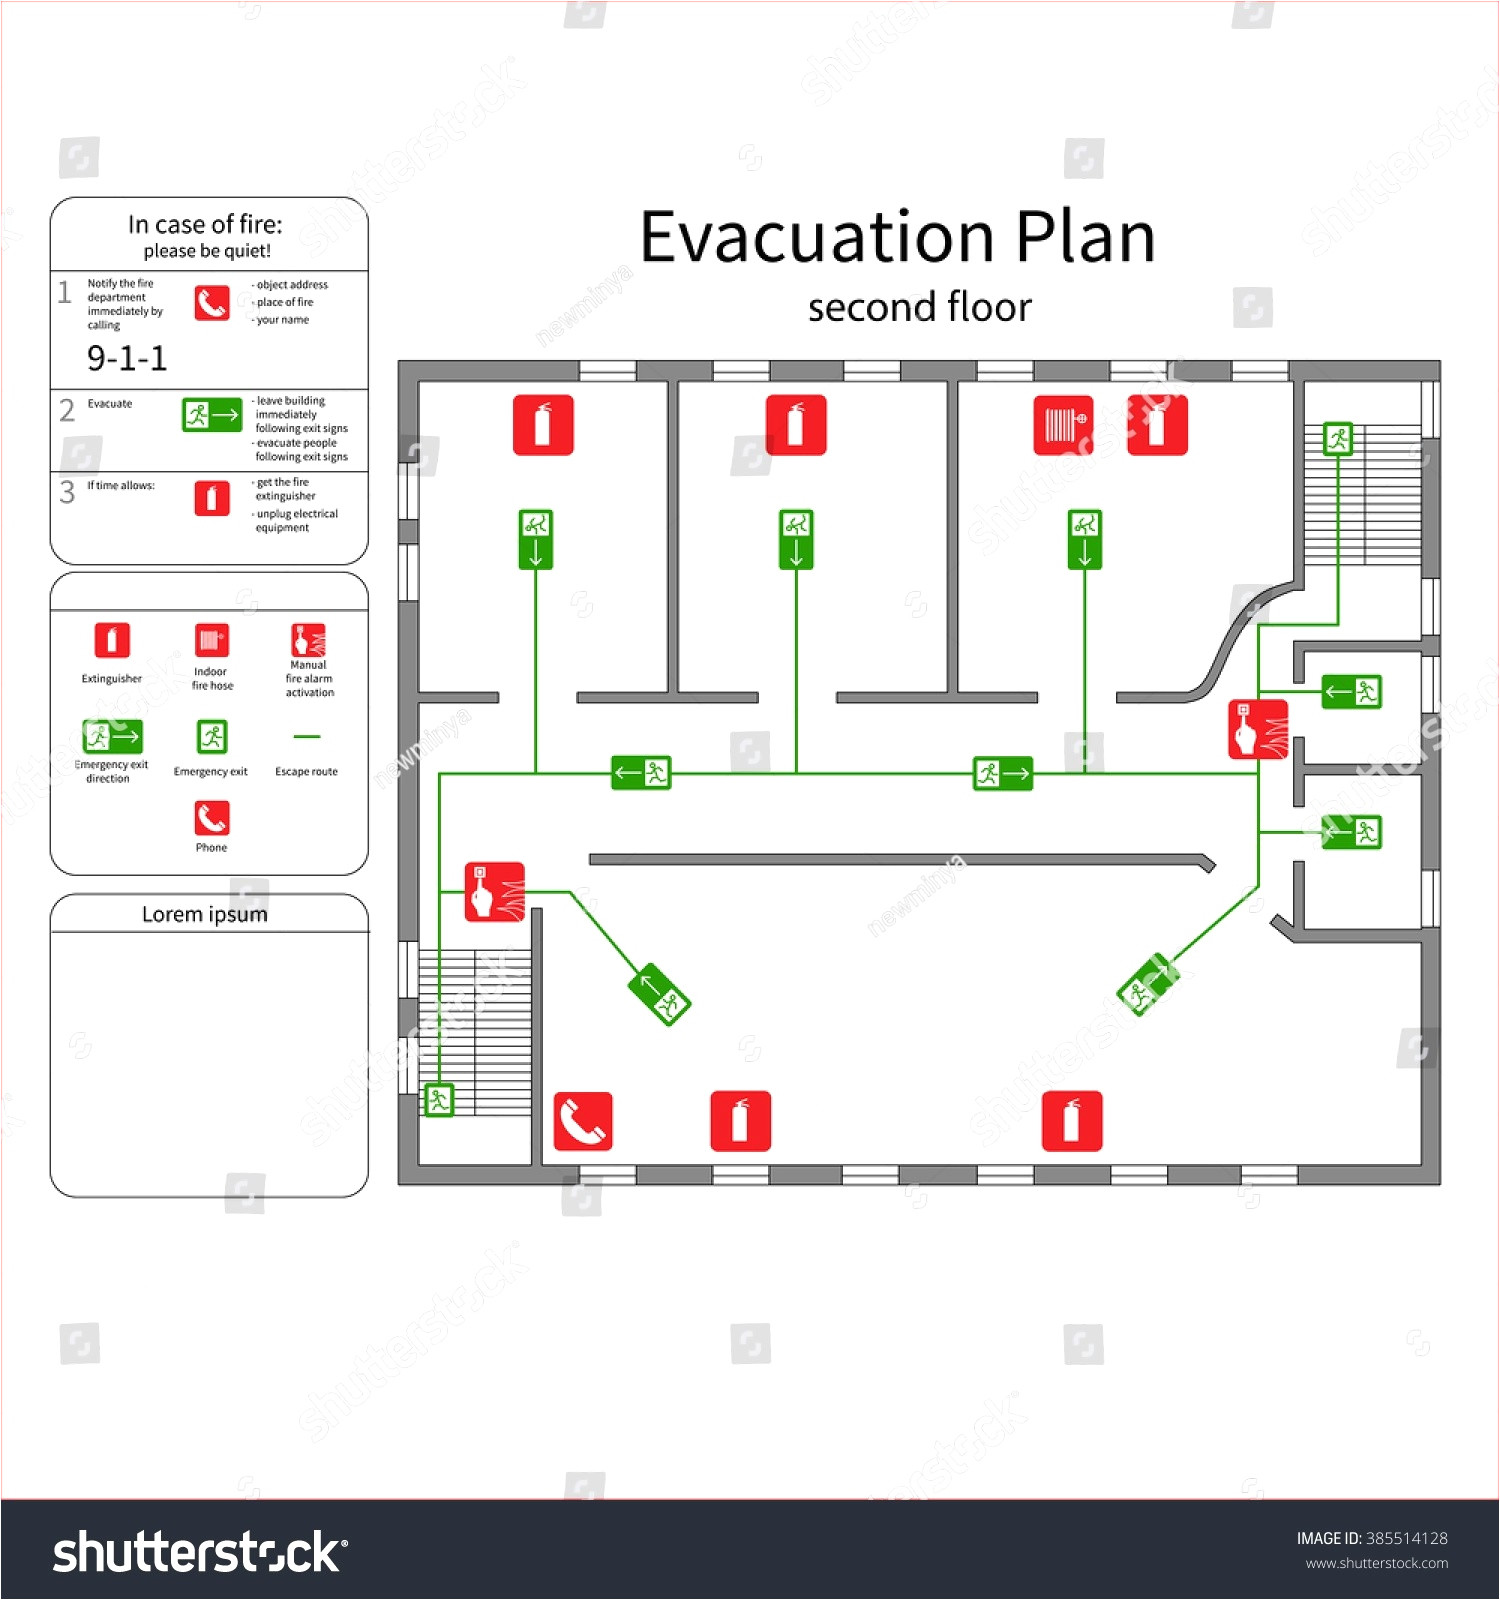 Home Evacuation Plan Gorgeous Evacuation Plan for Home 23 Fire Template Luxury